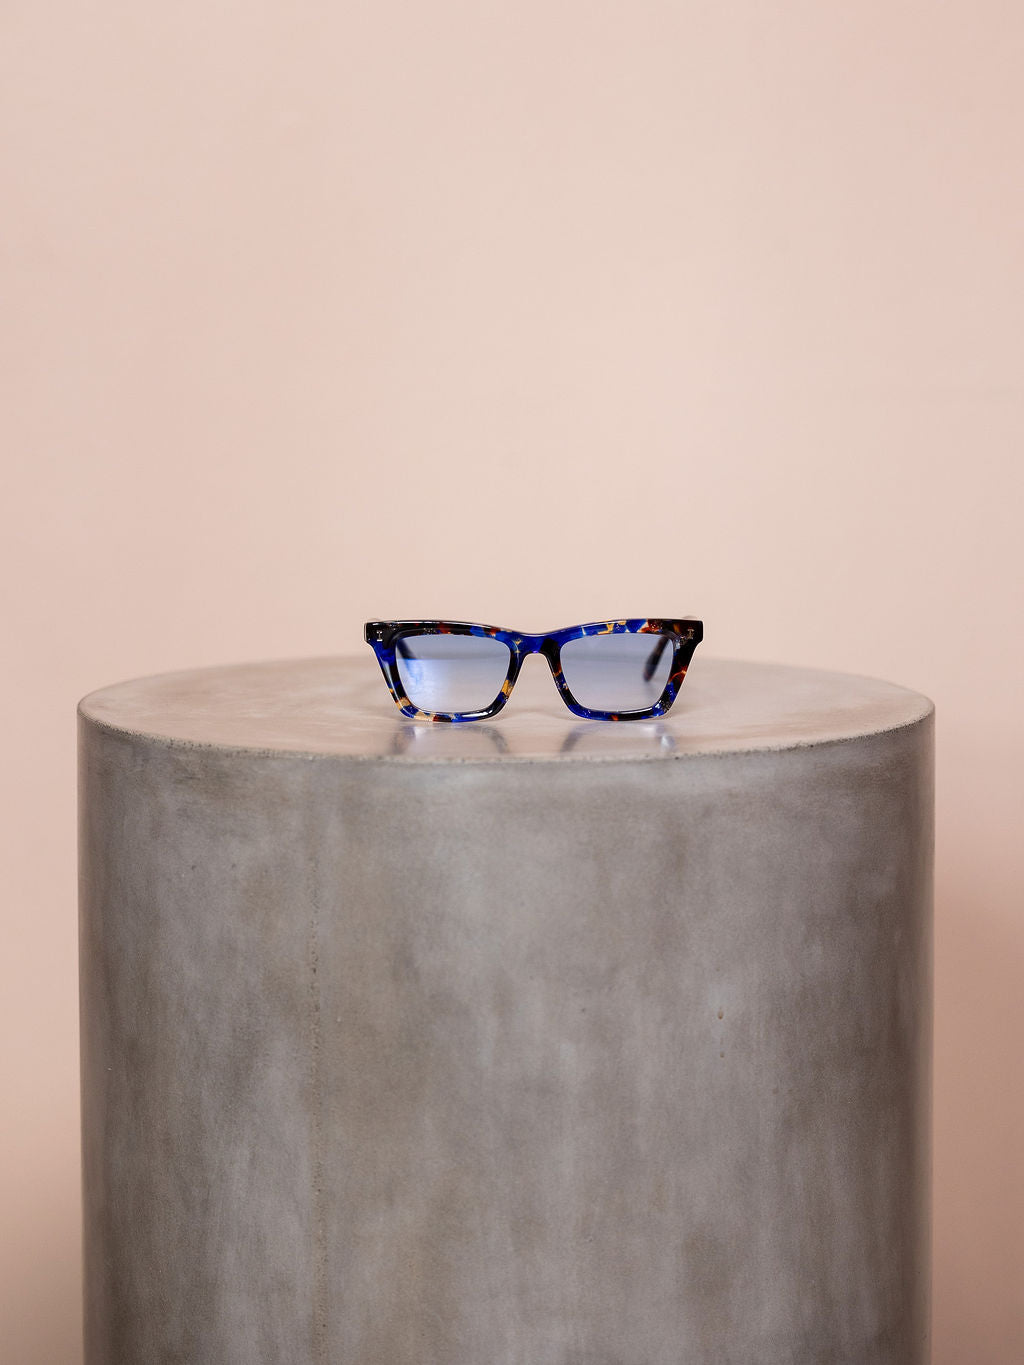 Patterned blue sunglasses on podium against pink background